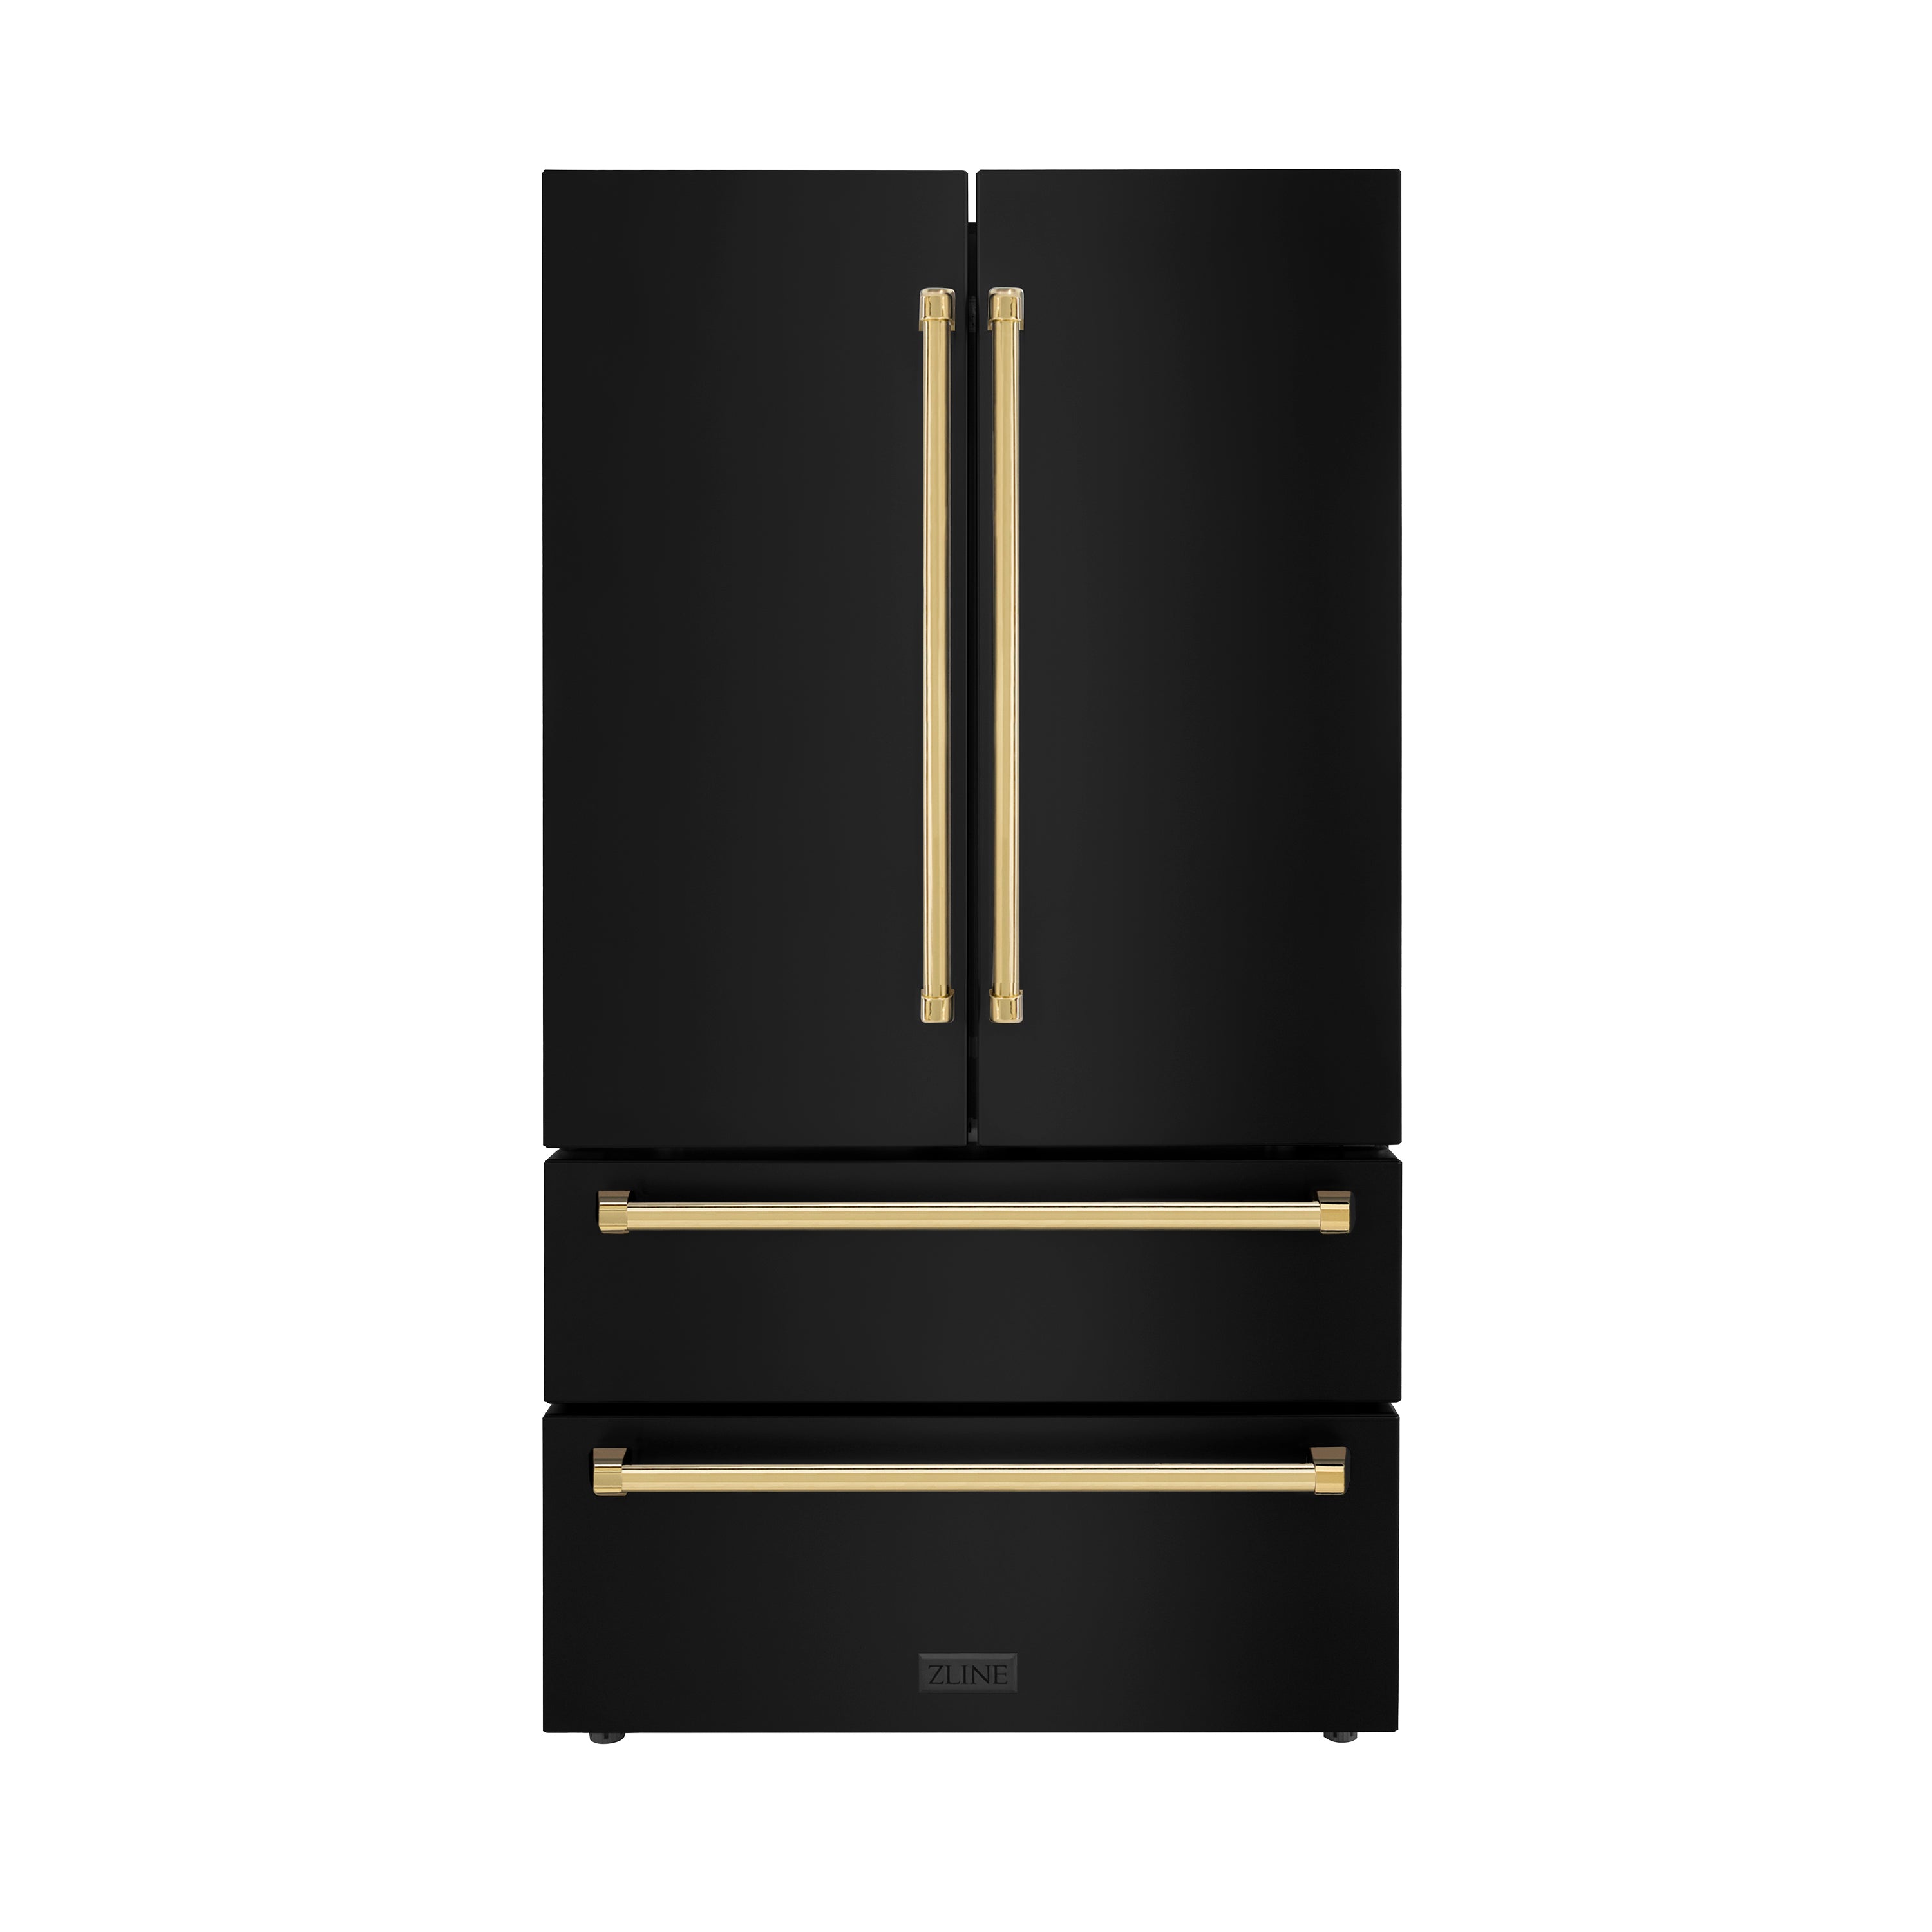 ZLINE 36" Autograph Edition 22.5 cu. ft 4-Door French Door Refrigerator with Ice Maker in Fingerprint Resistant Black Stainless Steel with Polished Gold Accents (RFMZ-36-BS-G)